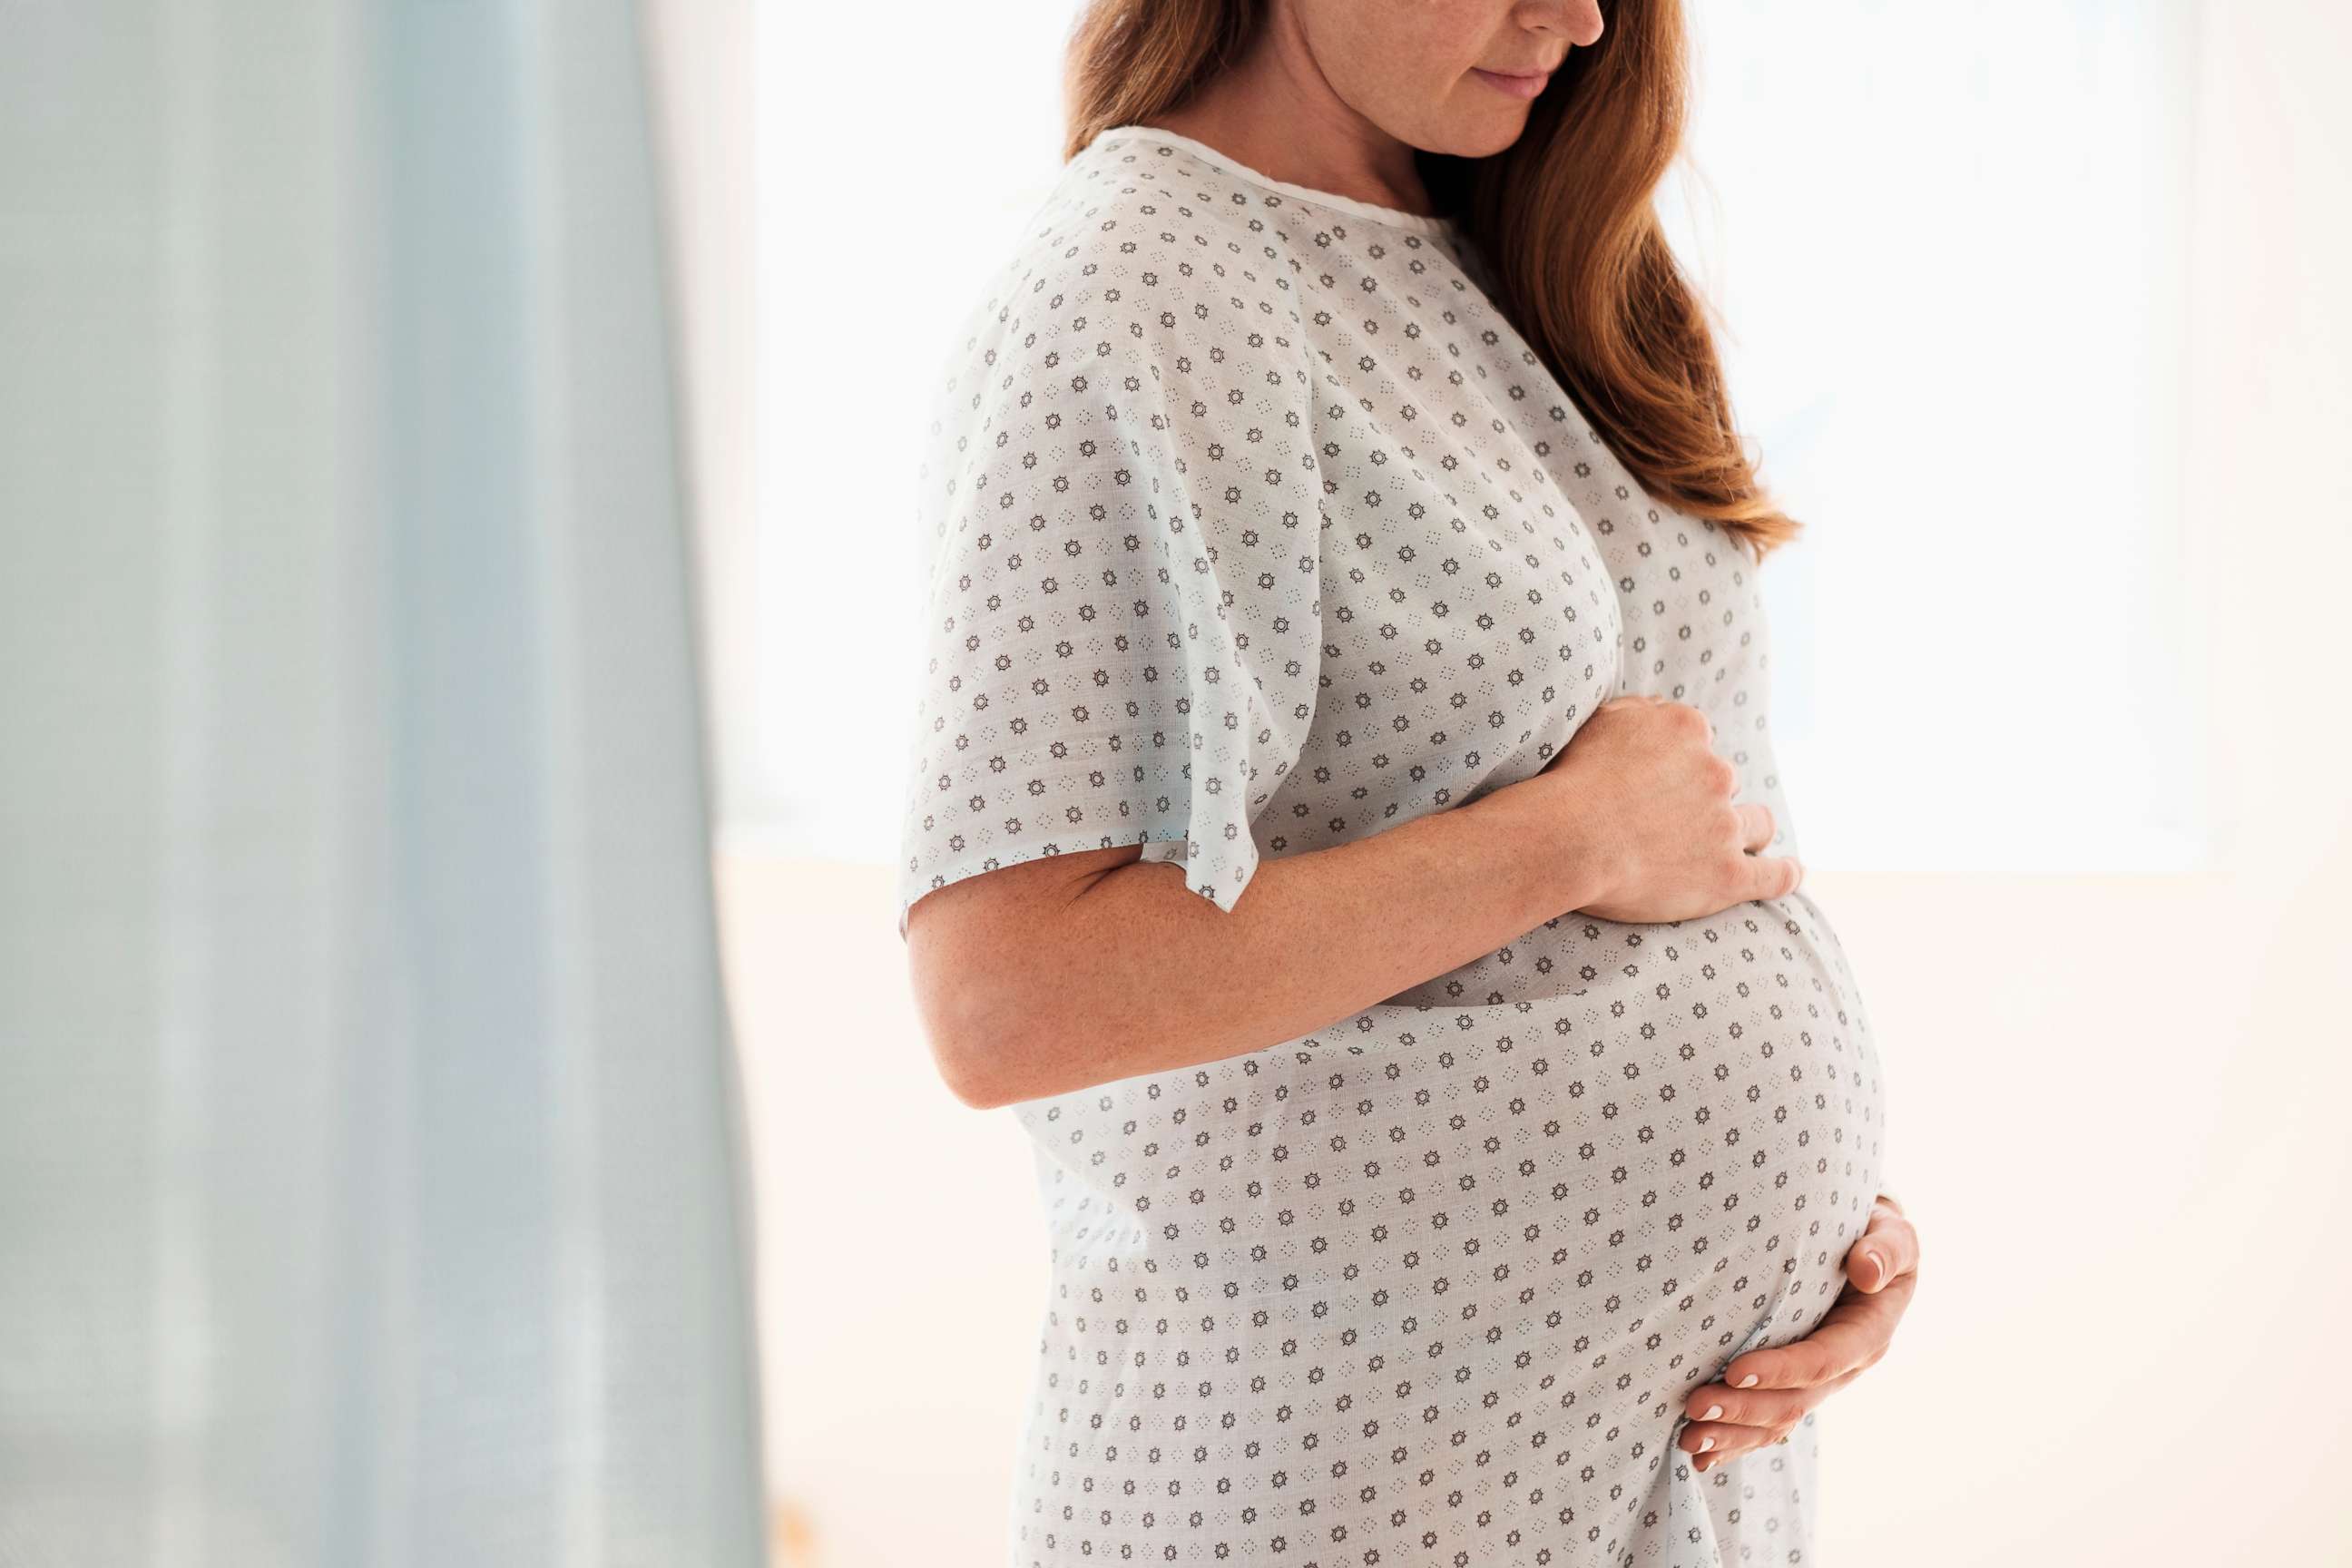 PHOTO: A pregnant woman is seen in this undated stock image.